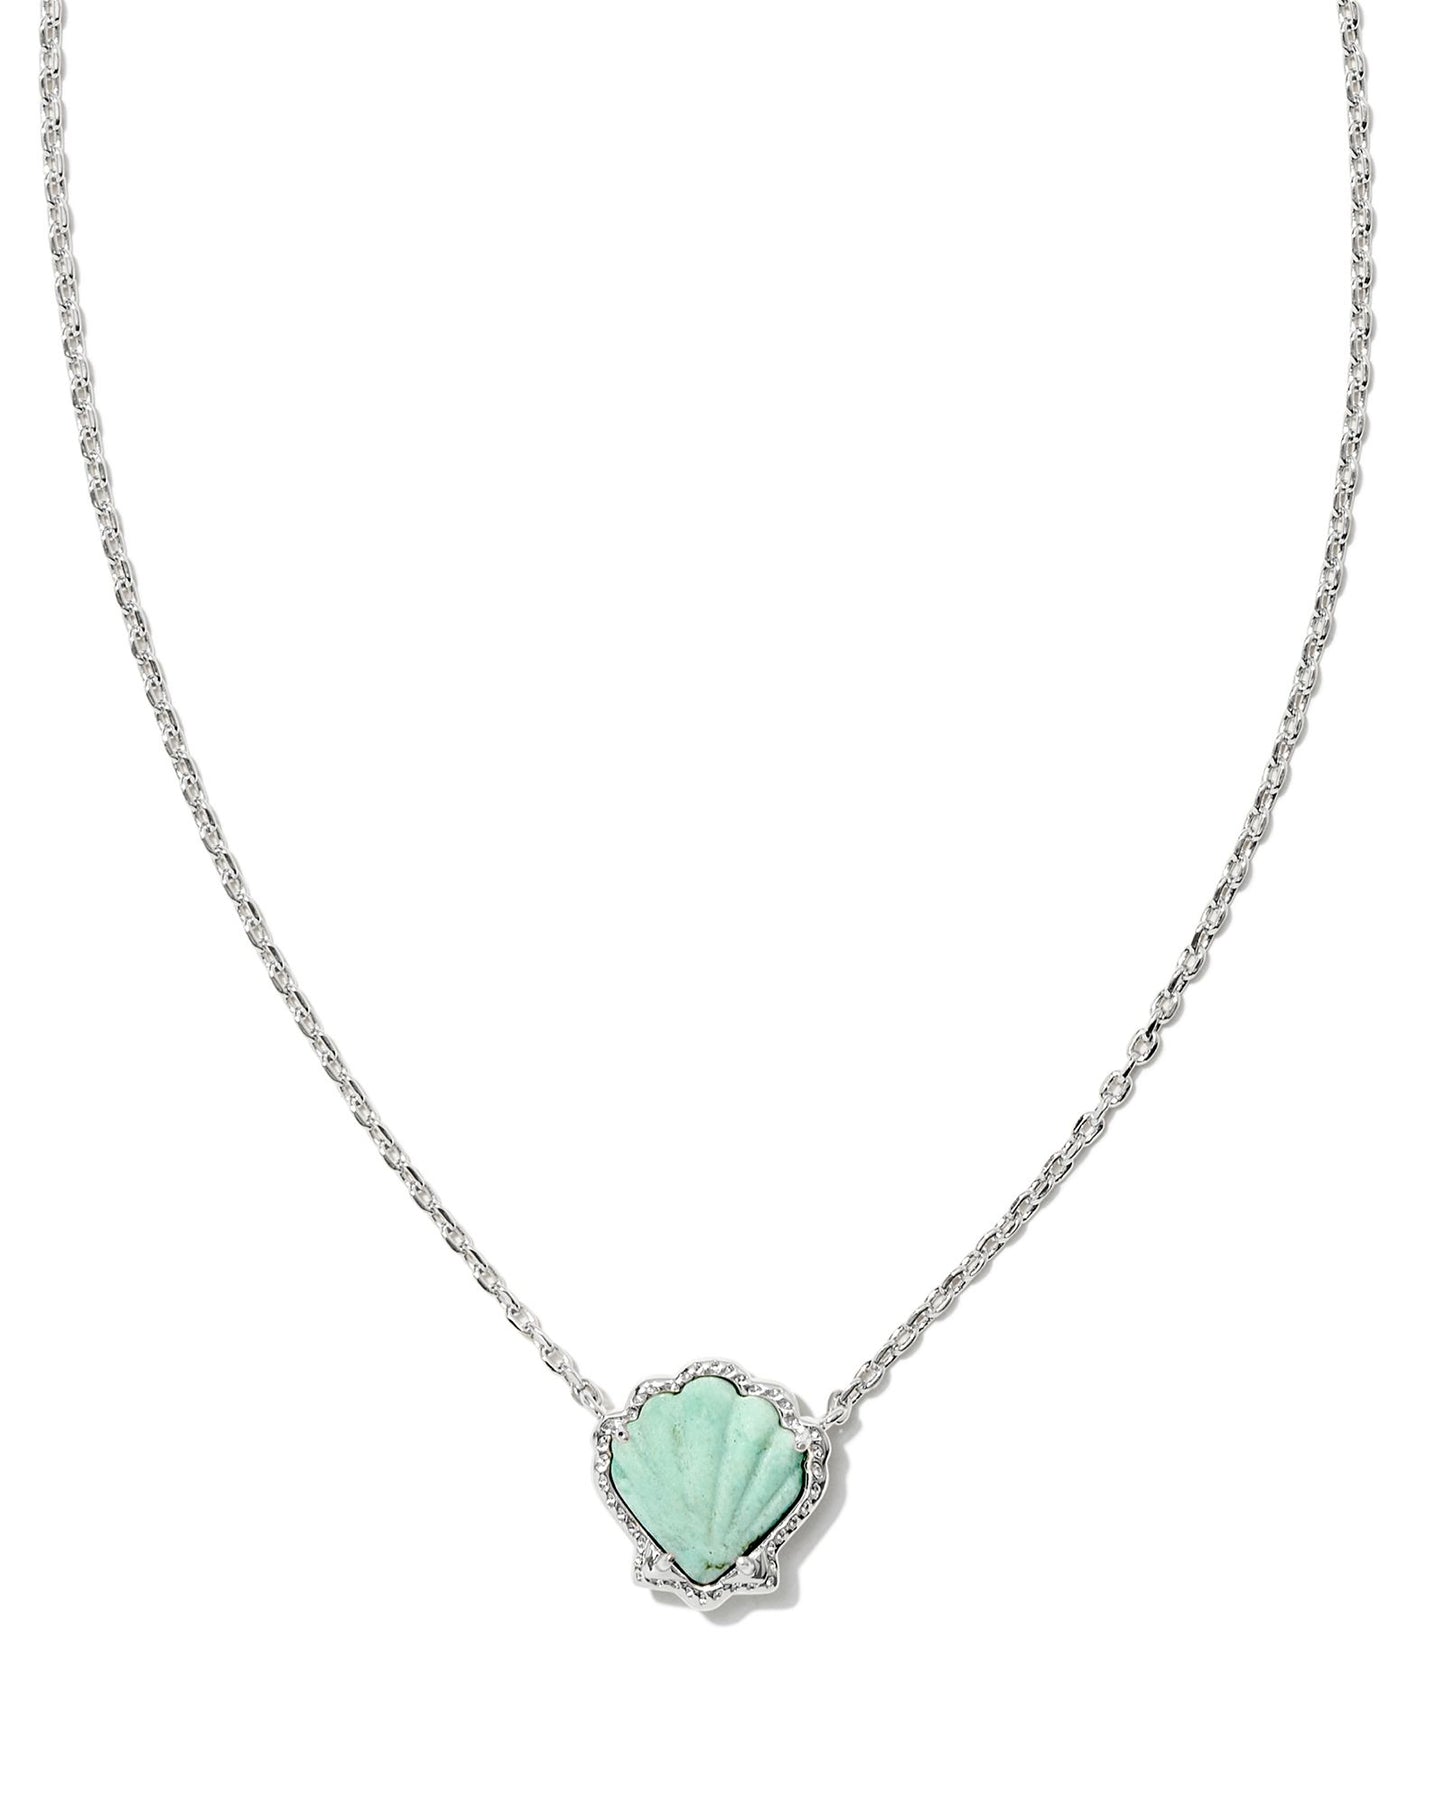 Brynne Silver Shell Short Pendant Necklace in Sea Green Chrysocolla